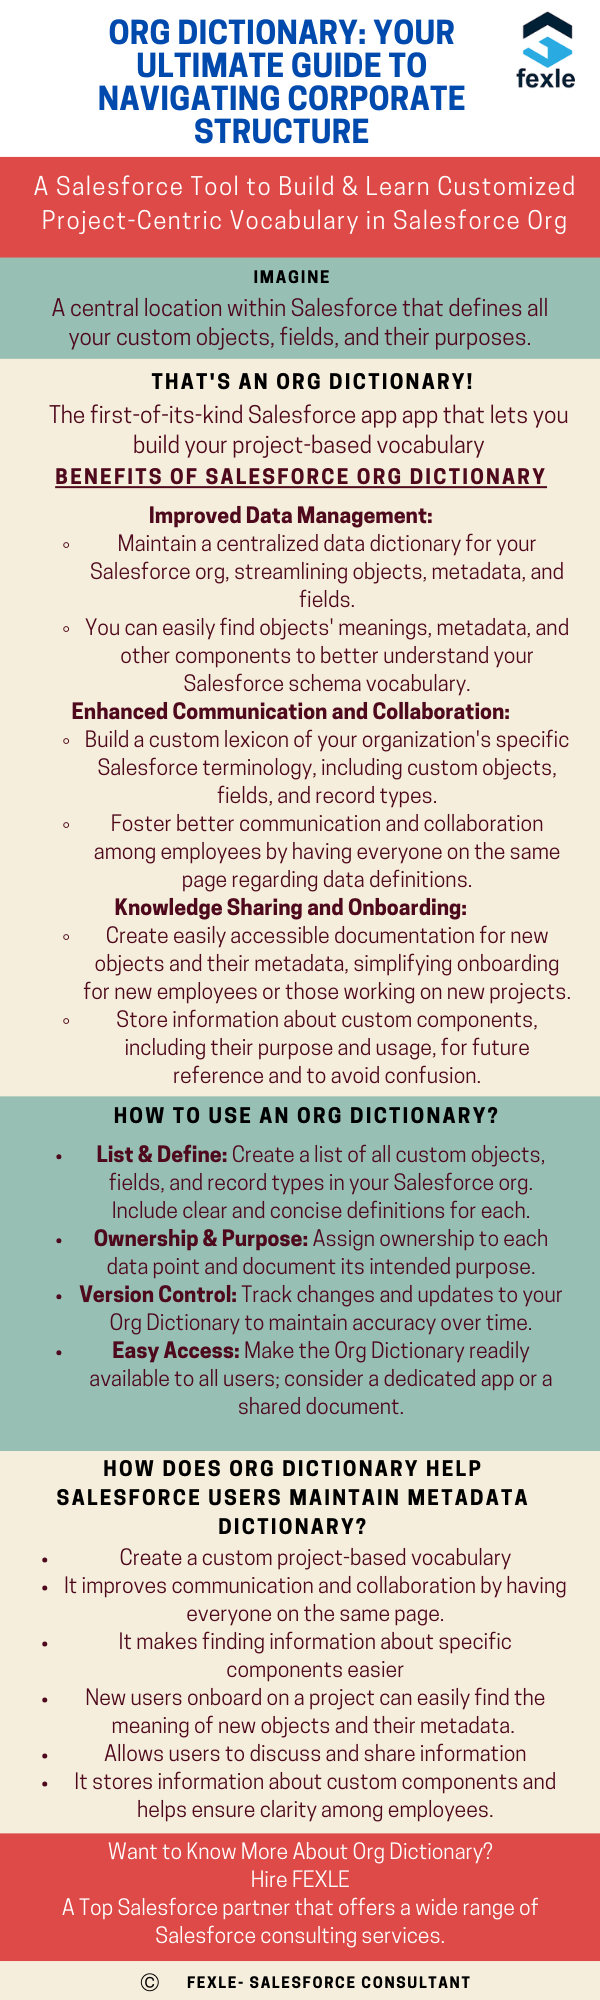 Org Dictionary — A Tool To Learn & Build Project-Centric Vocabulary in Your Salesforce Org?